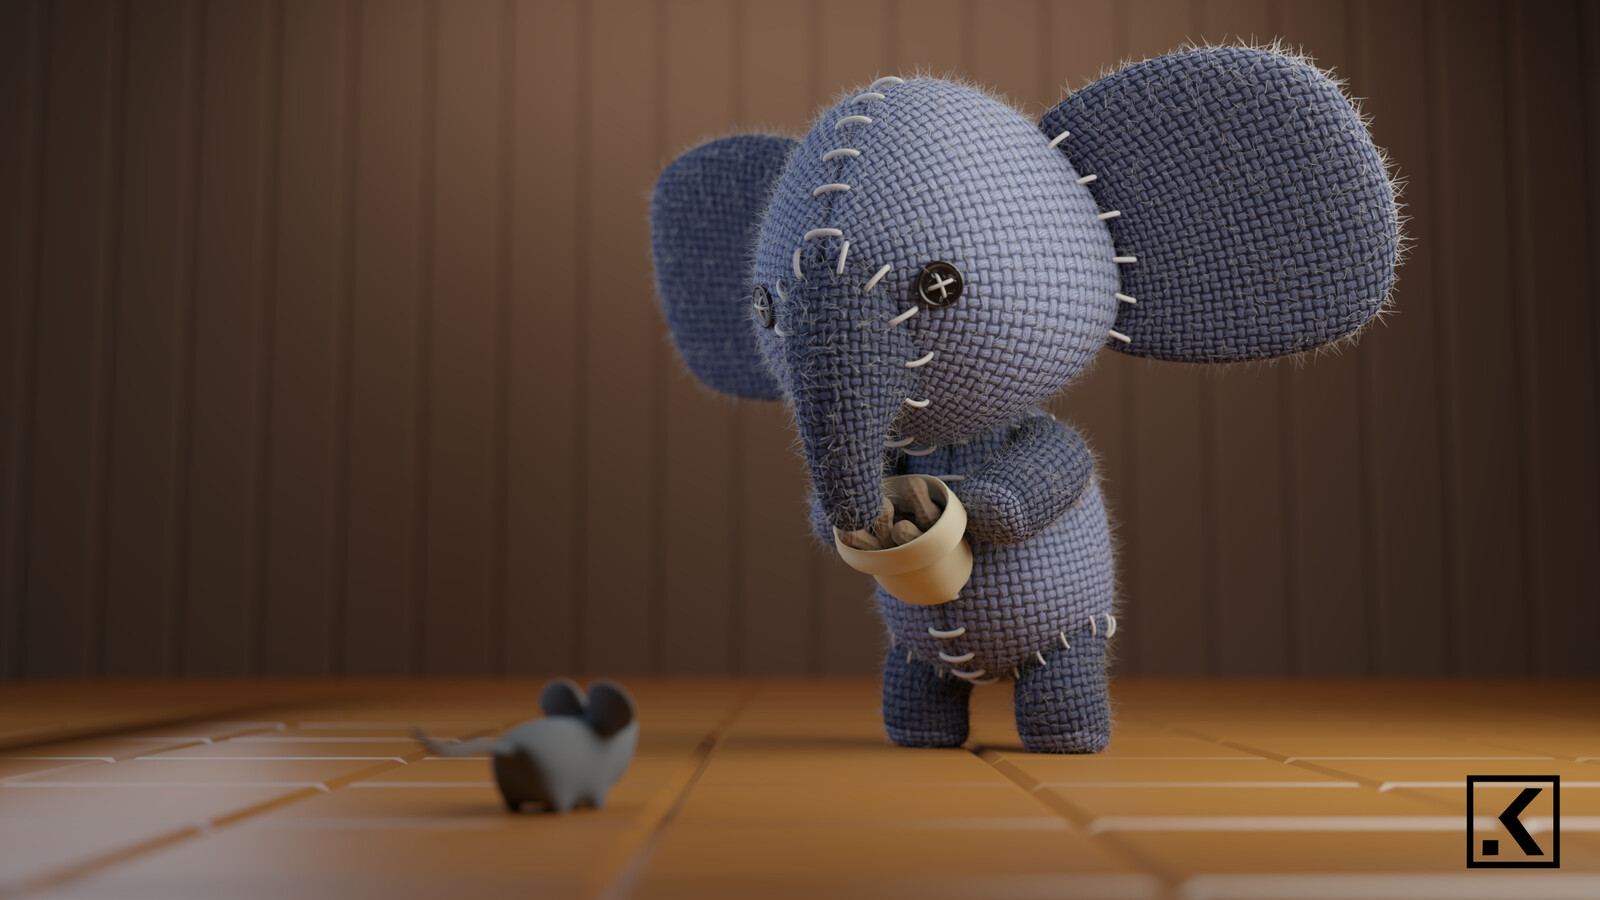 Every toy has its own story to tell... 🐘🐘🐘